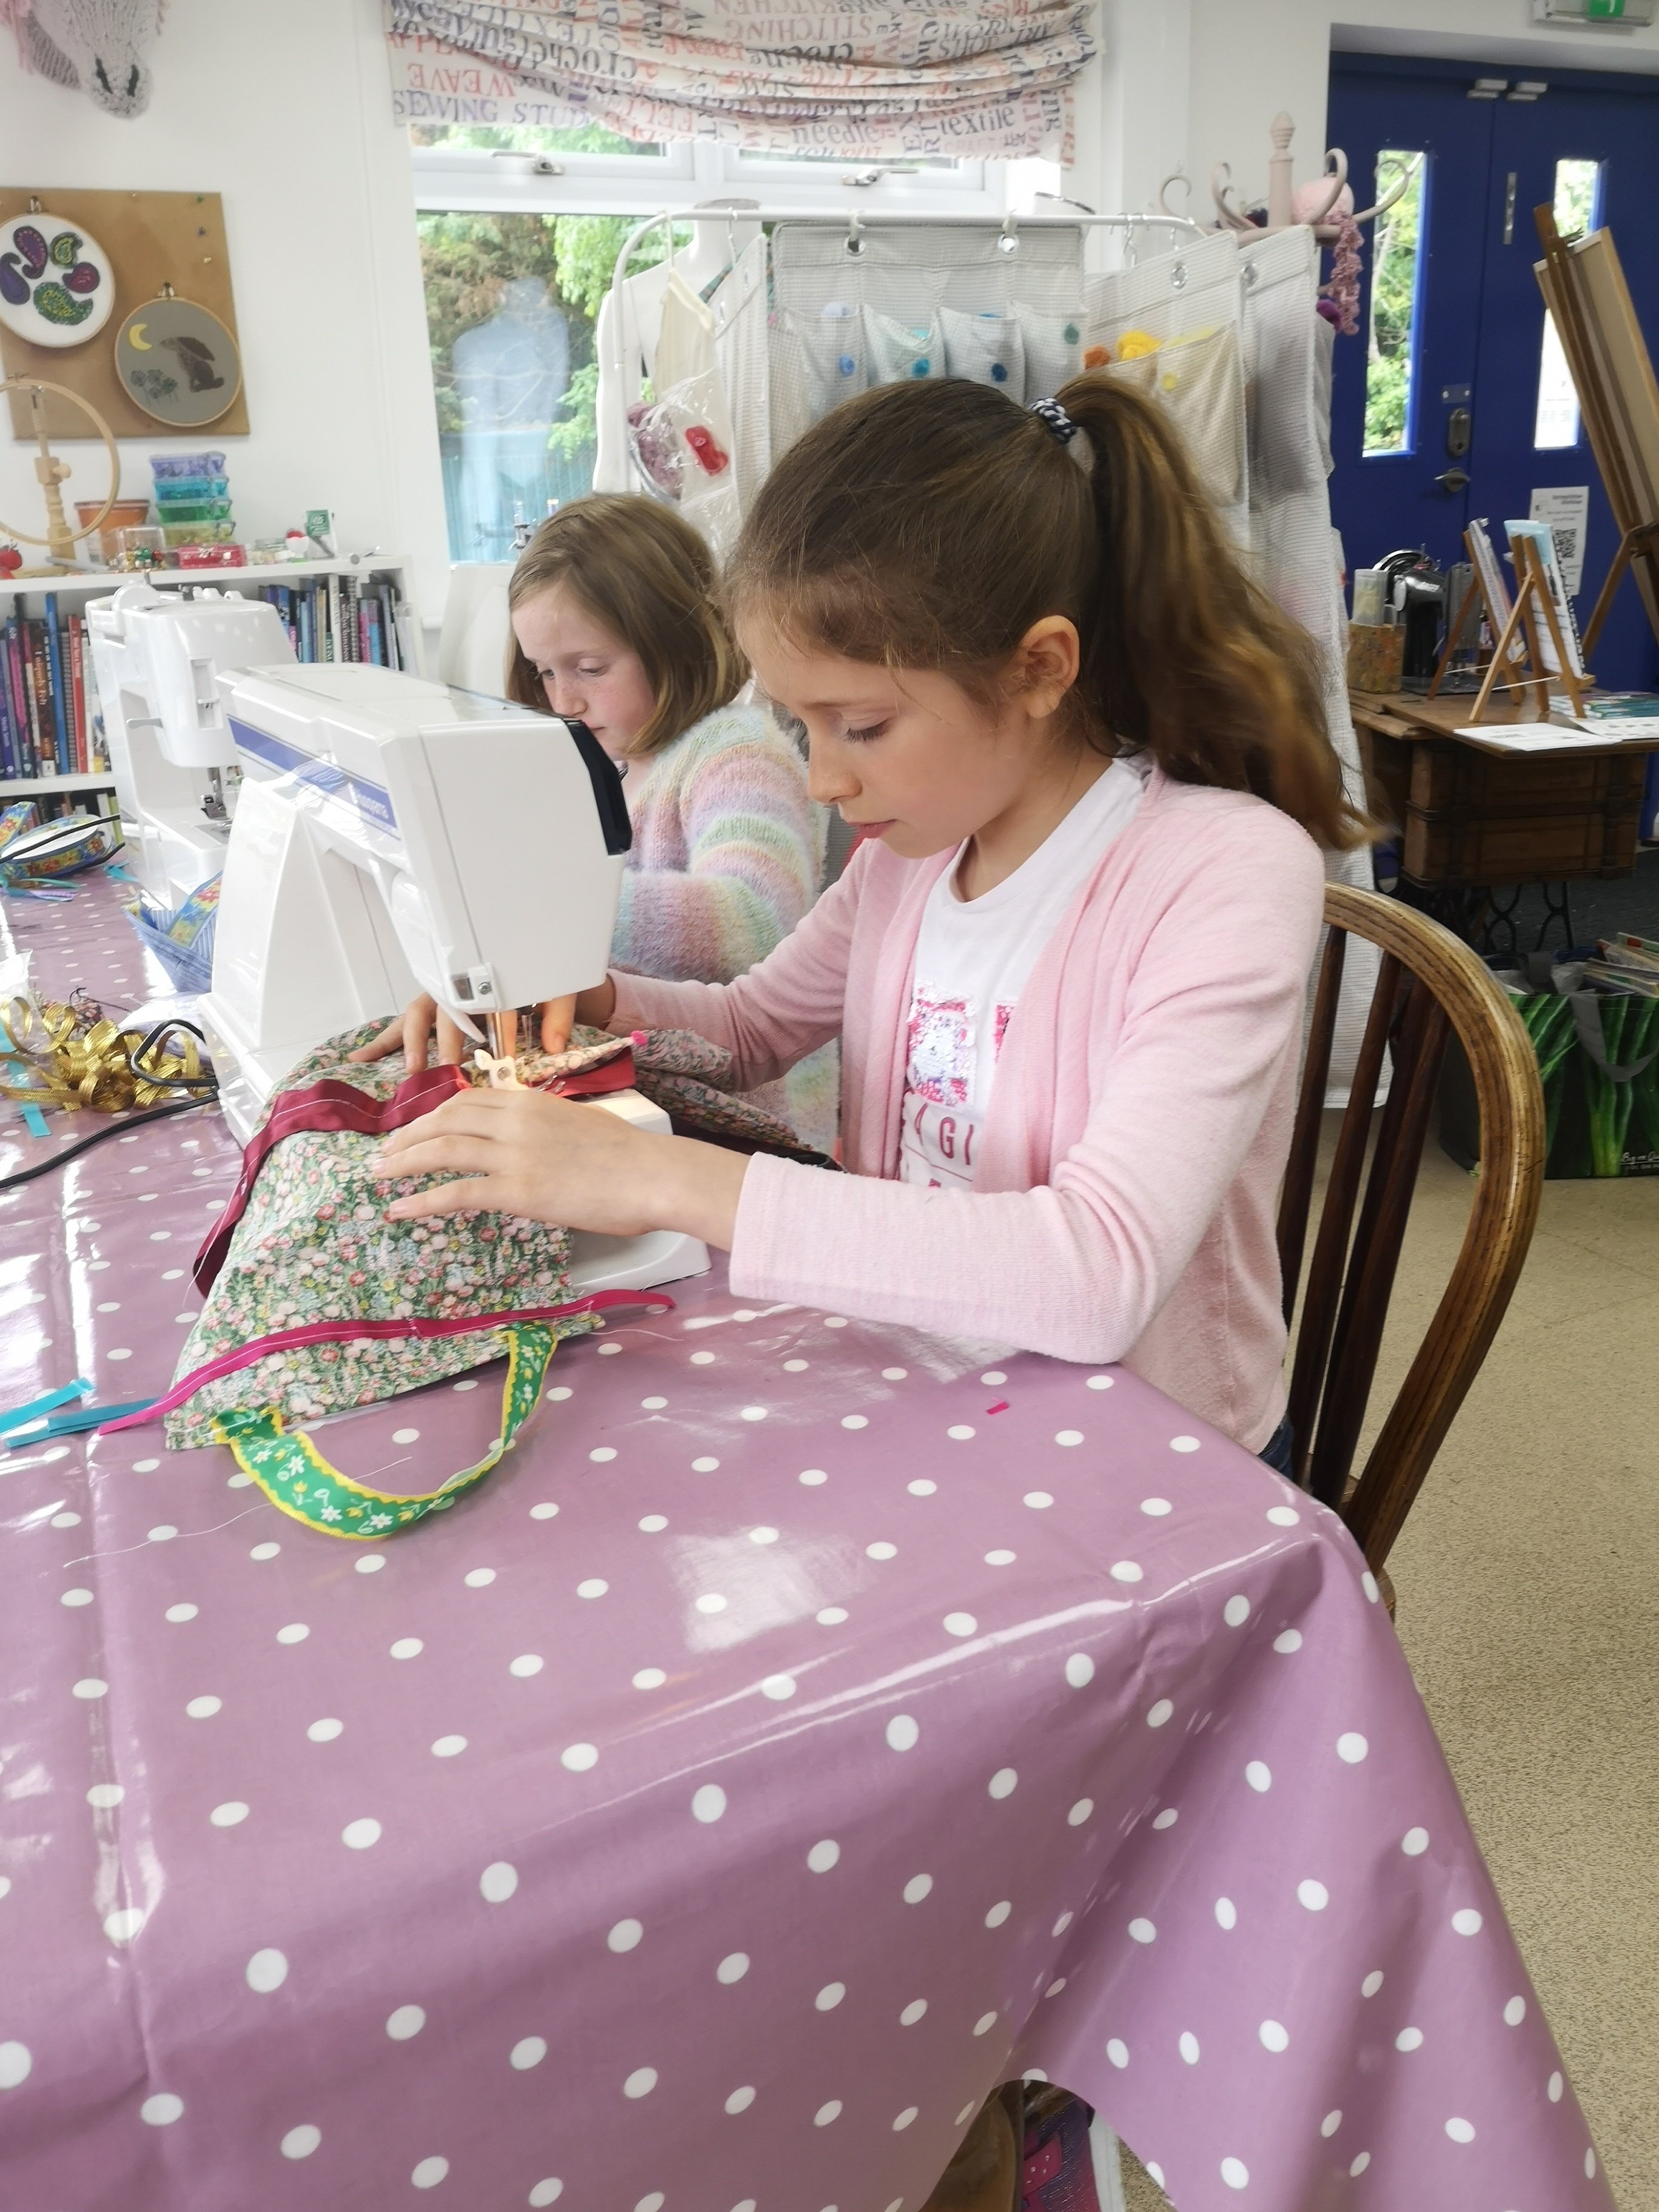 Sewing Session for Home Schoolers